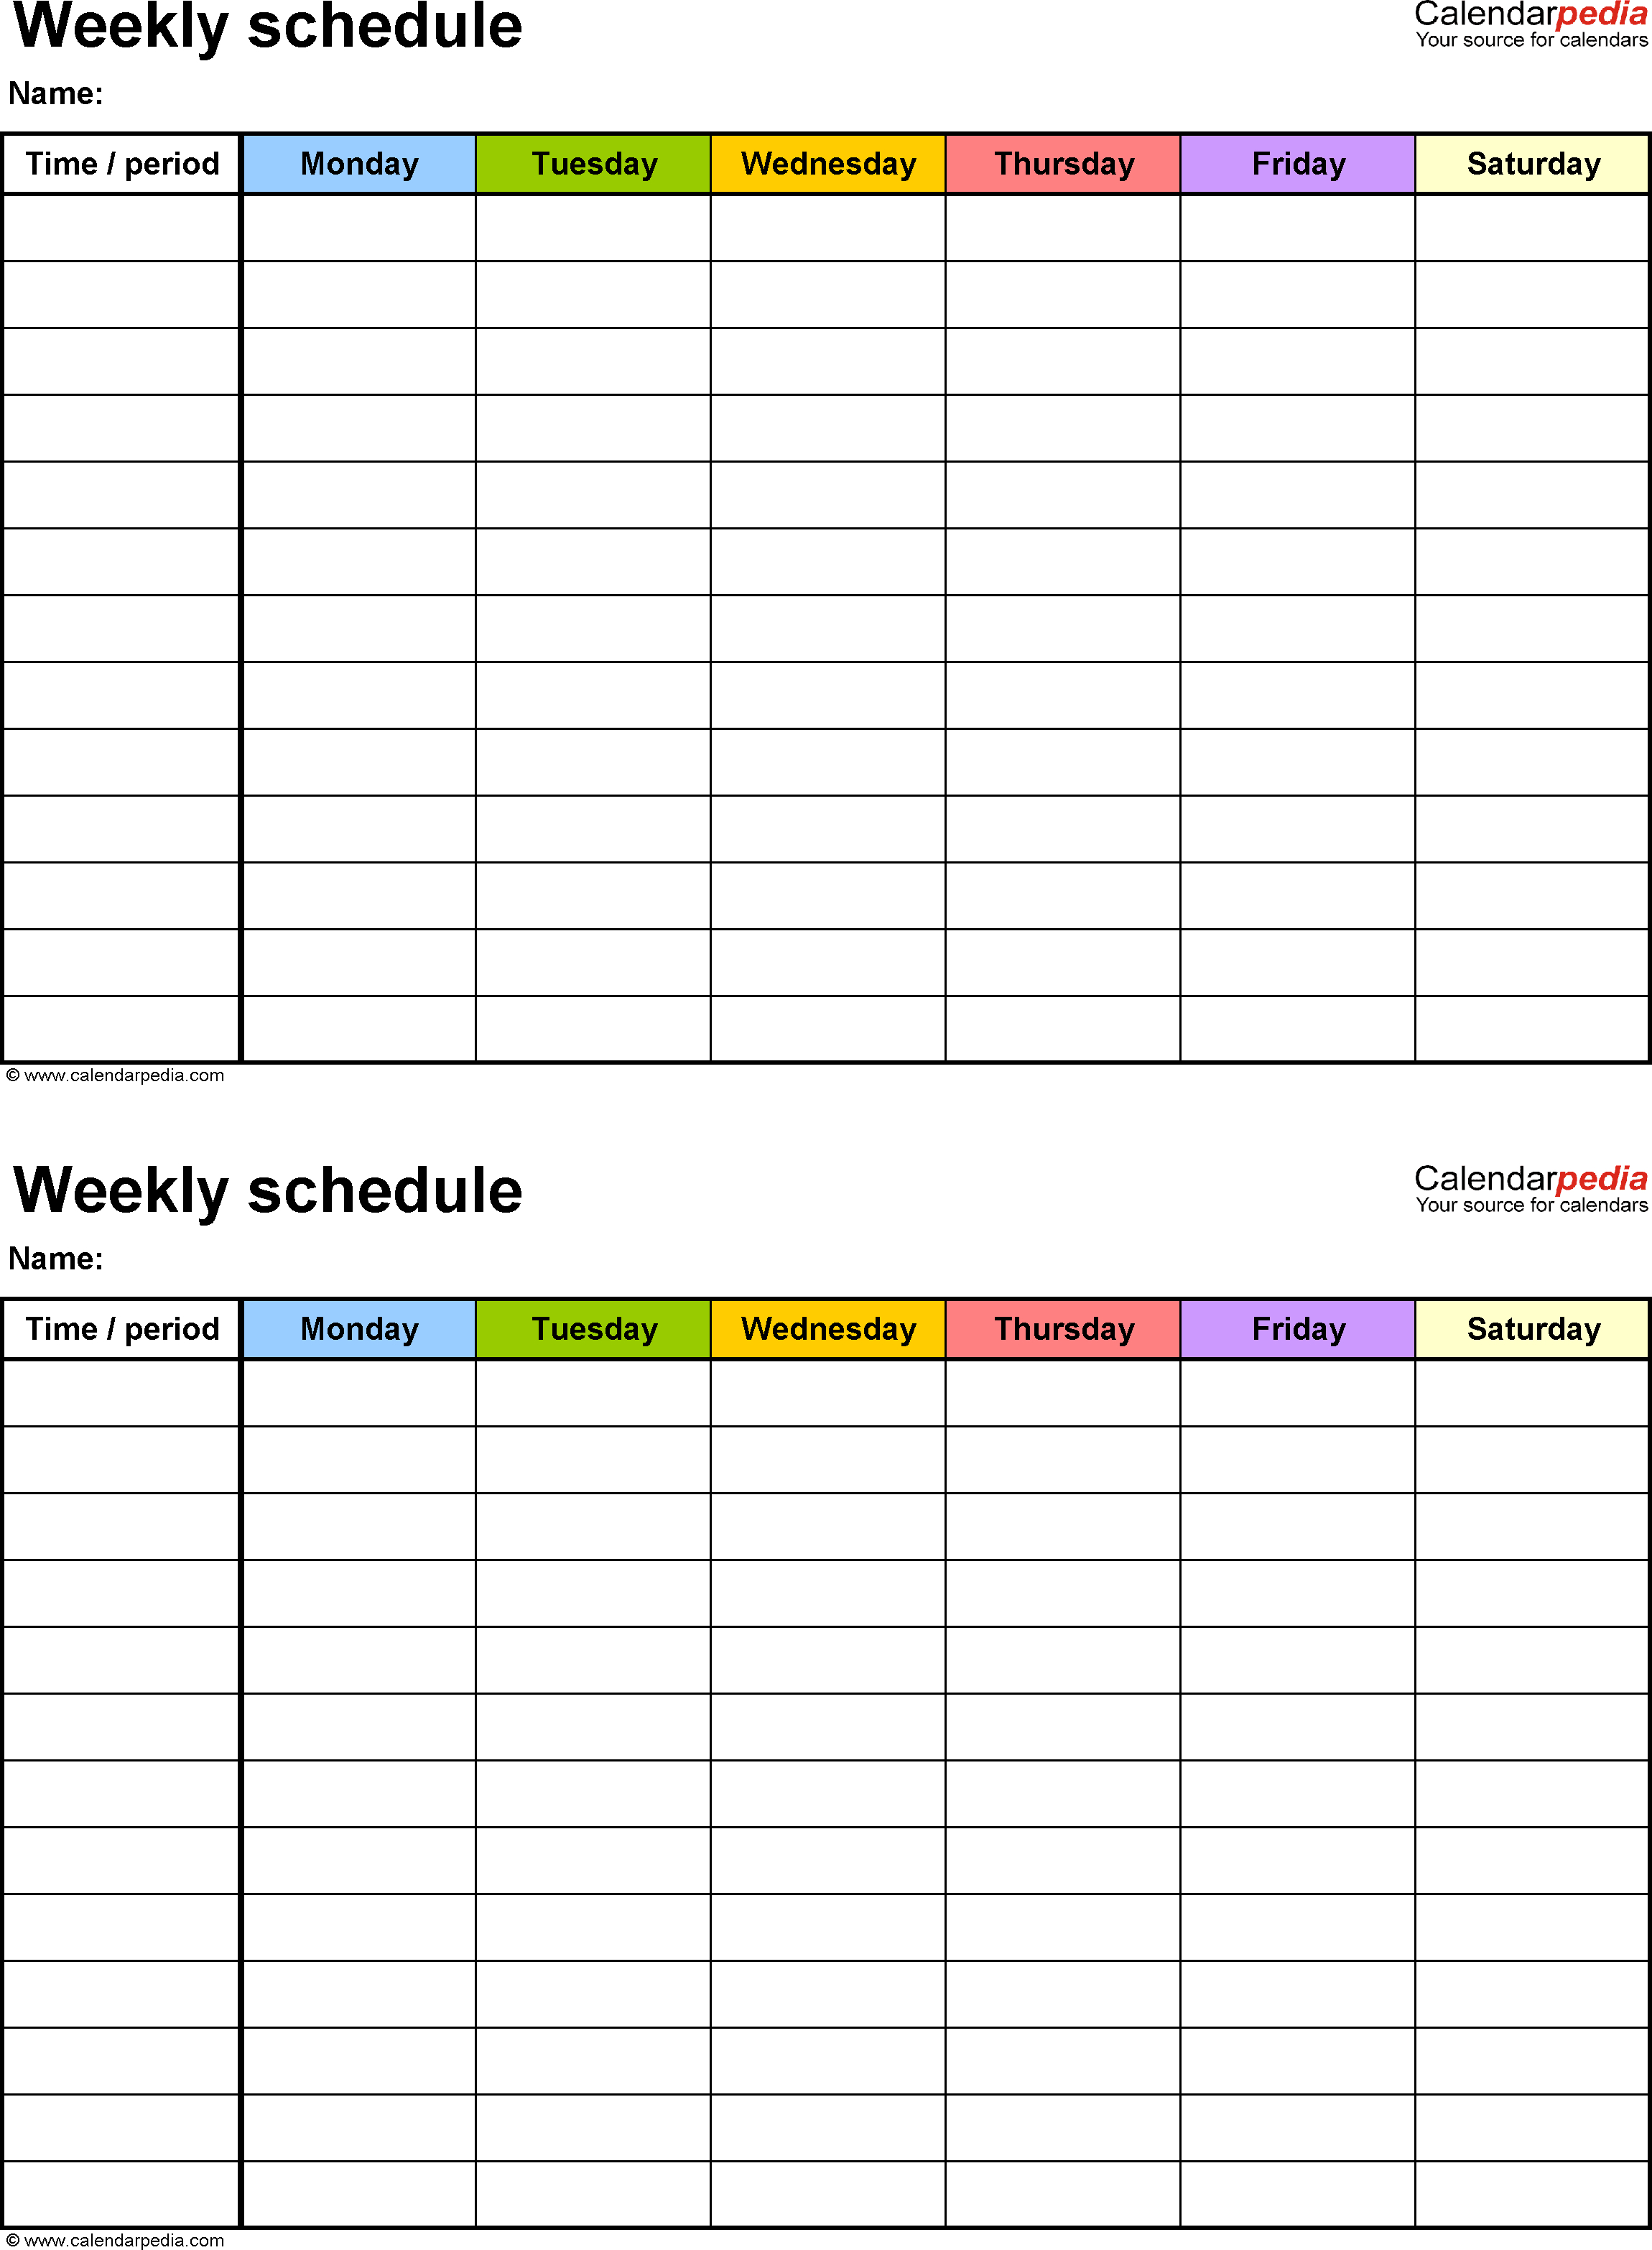 Free Weekly Schedule Templates For Word - 18 Templates - Free Printable Work Schedule Maker